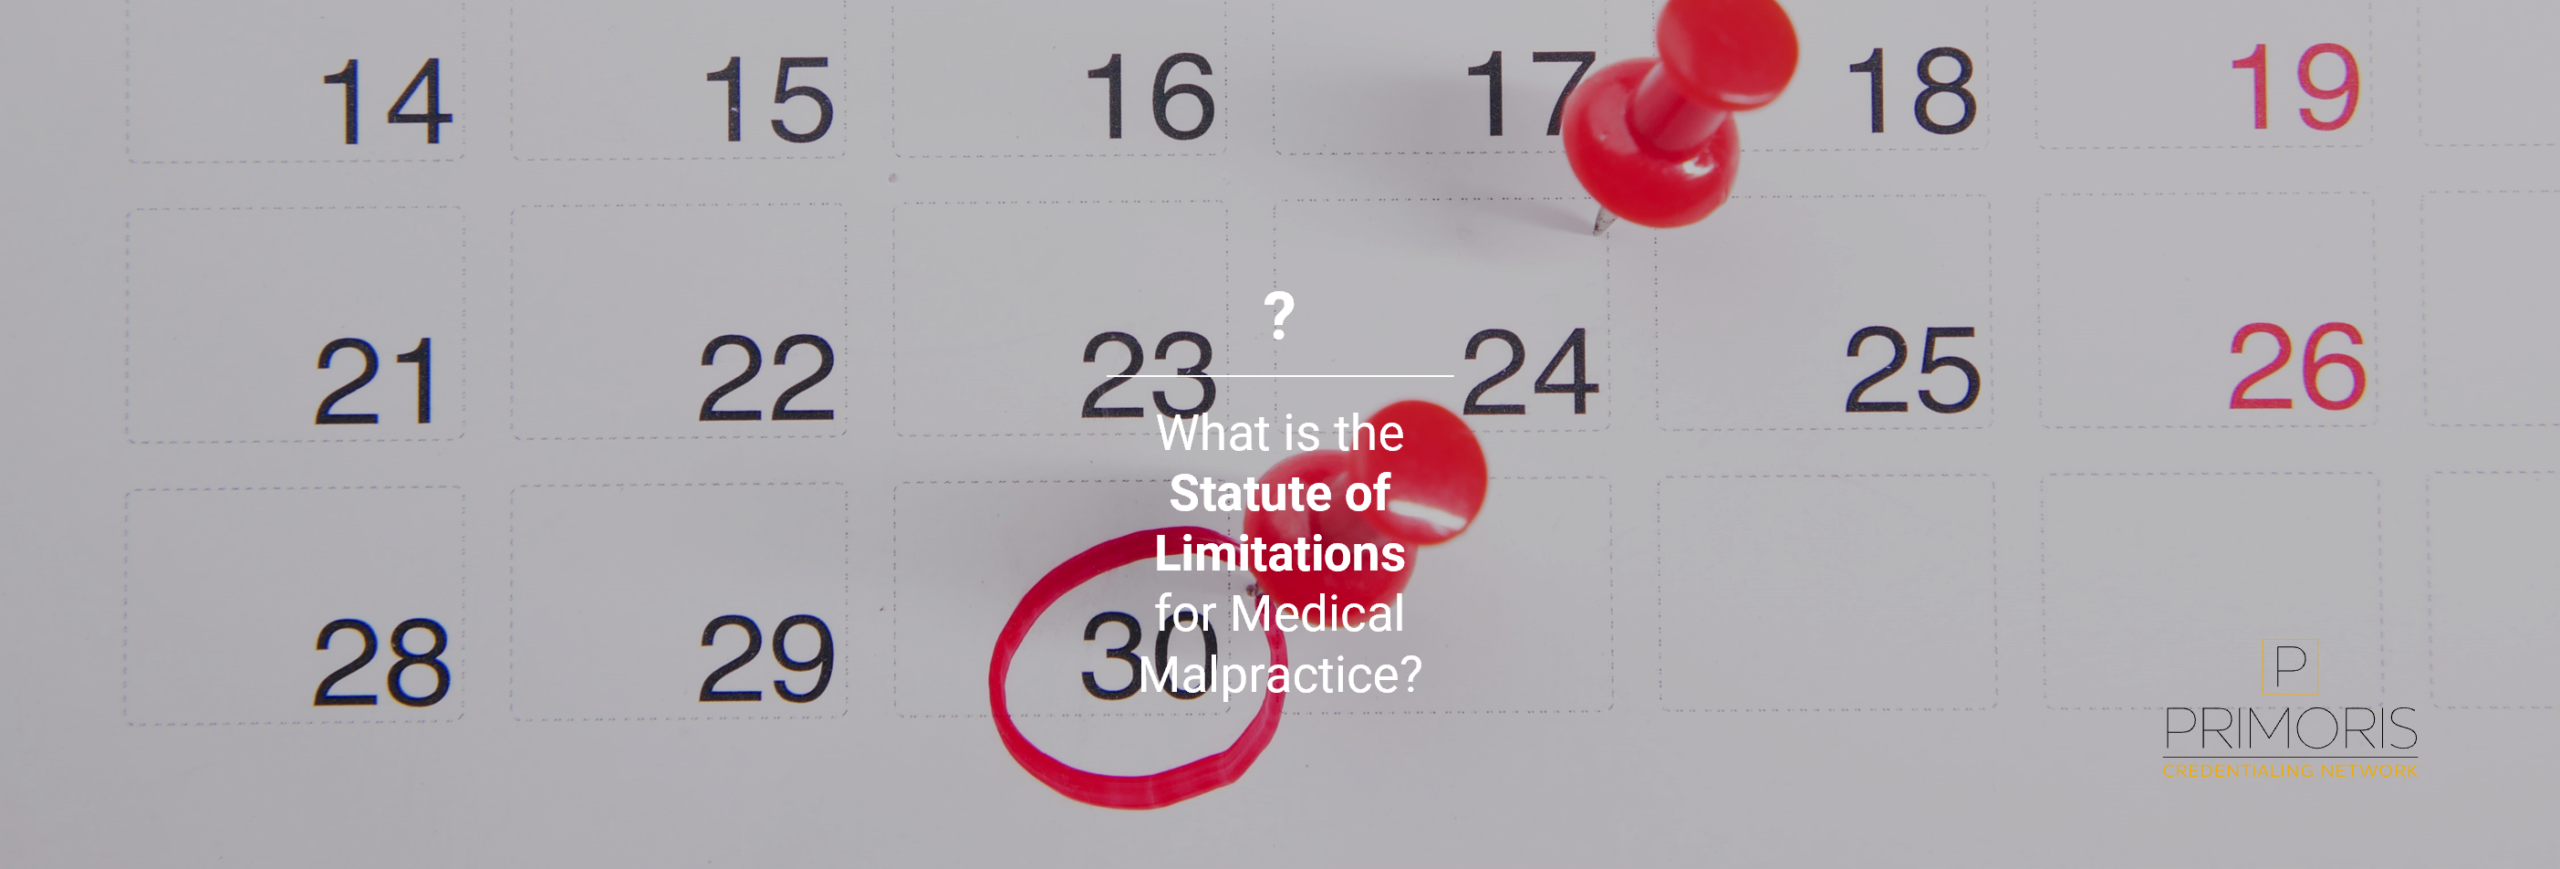 FifthAvenueAgency.com Statute of Limitations for Medical Malpractice